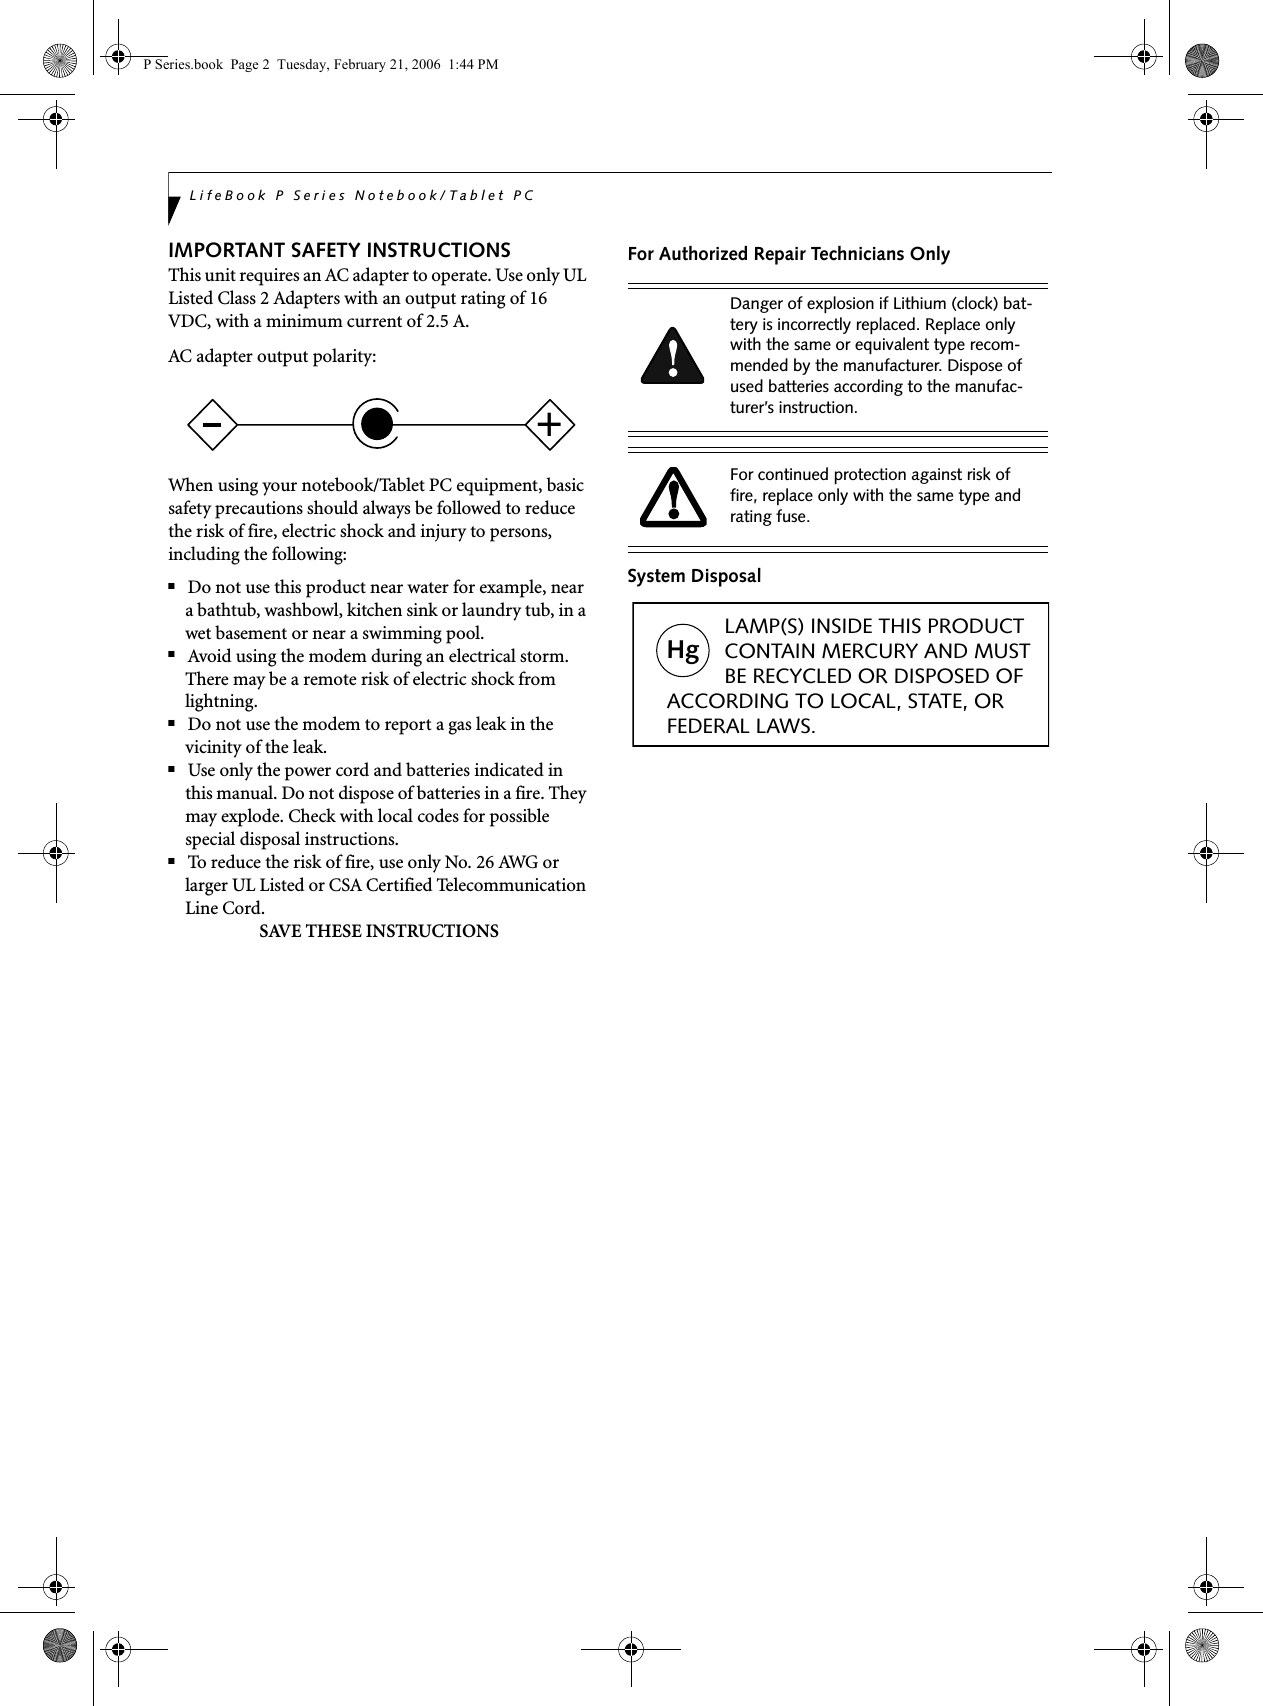 LifeBook P Series Notebook/Tablet PCIMPORTANT SAFETY INSTRUCTIONS This unit requires an AC adapter to operate. Use only UL Listed Class 2 Adapters with an output rating of 16 VDC, with a minimum current of 2.5 A.AC adapter output polarity:When using your notebook/Tablet PC equipment, basic safety precautions should always be followed to reduce the risk of fire, electric shock and injury to persons, including the following:■Do not use this product near water for example, near a bathtub, washbowl, kitchen sink or laundry tub, in a wet basement or near a swimming pool.■Avoid using the modem during an electrical storm. There may be a remote risk of electric shock from lightning.■Do not use the modem to report a gas leak in the vicinity of the leak.■Use only the power cord and batteries indicated in this manual. Do not dispose of batteries in a fire. They may explode. Check with local codes for possible special disposal instructions.■To reduce the risk of fire, use only No. 26 AWG or larger UL Listed or CSA Certified Telecommunication Line Cord.SAVE THESE INSTRUCTIONSFor Authorized Repair Technicians OnlySystem Disposal+Danger of explosion if Lithium (clock) bat-tery is incorrectly replaced. Replace only with the same or equivalent type recom-mended by the manufacturer. Dispose of used batteries according to the manufac-turer’s instruction.For continued protection against risk of fire, replace only with the same type and rating fuse.Hg          LAMP(S) INSIDE THIS PRODUCT            CONTAIN MERCURY AND MUST          BE RECYCLED OR DISPOSED OF ACCORDING TO LOCAL, STATE, ORFEDERAL LAWS.P Series.book  Page 2  Tuesday, February 21, 2006  1:44 PM